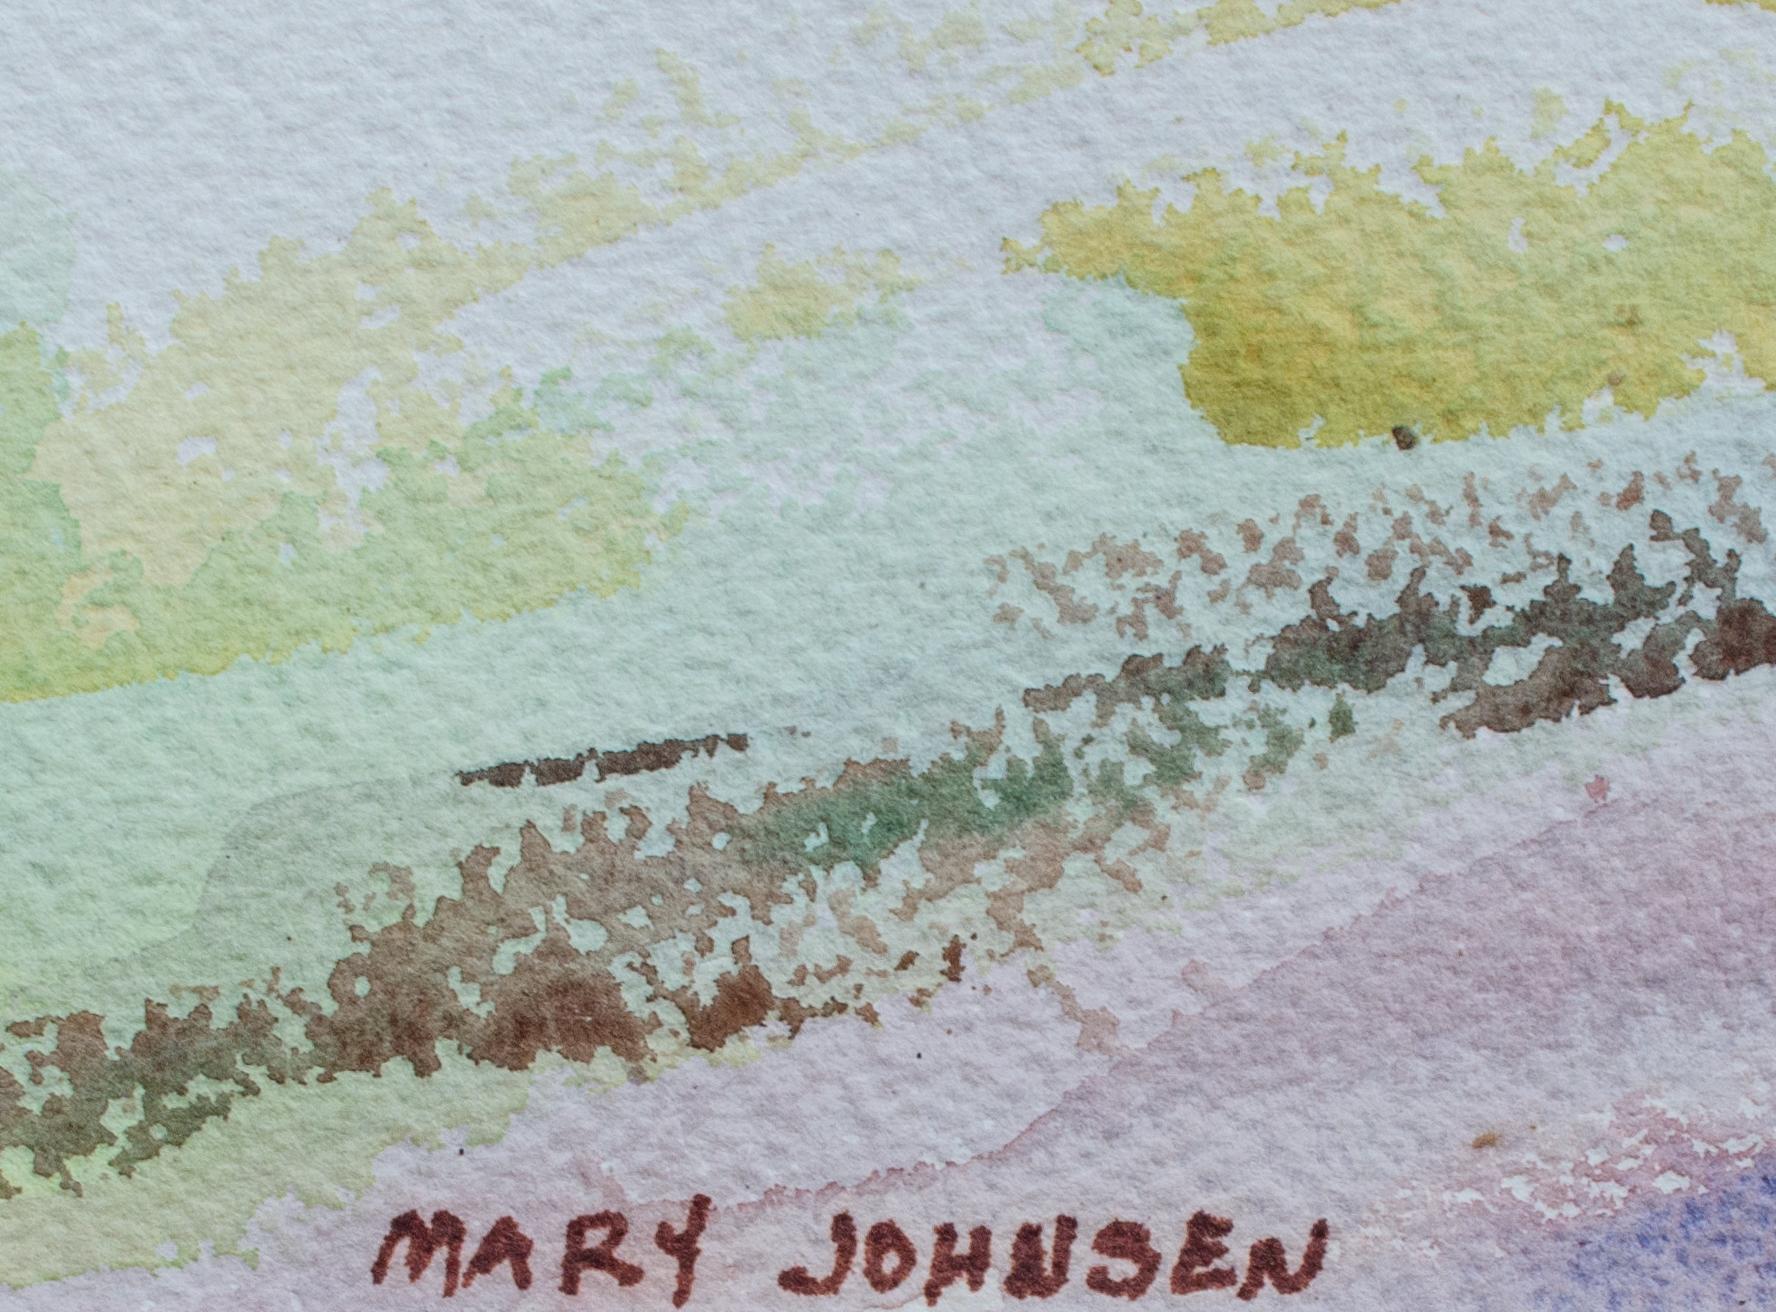 4 American Watercolors, c. 1950s, by Mary M. Johnsen - American Modern Art by Mary Johnsen